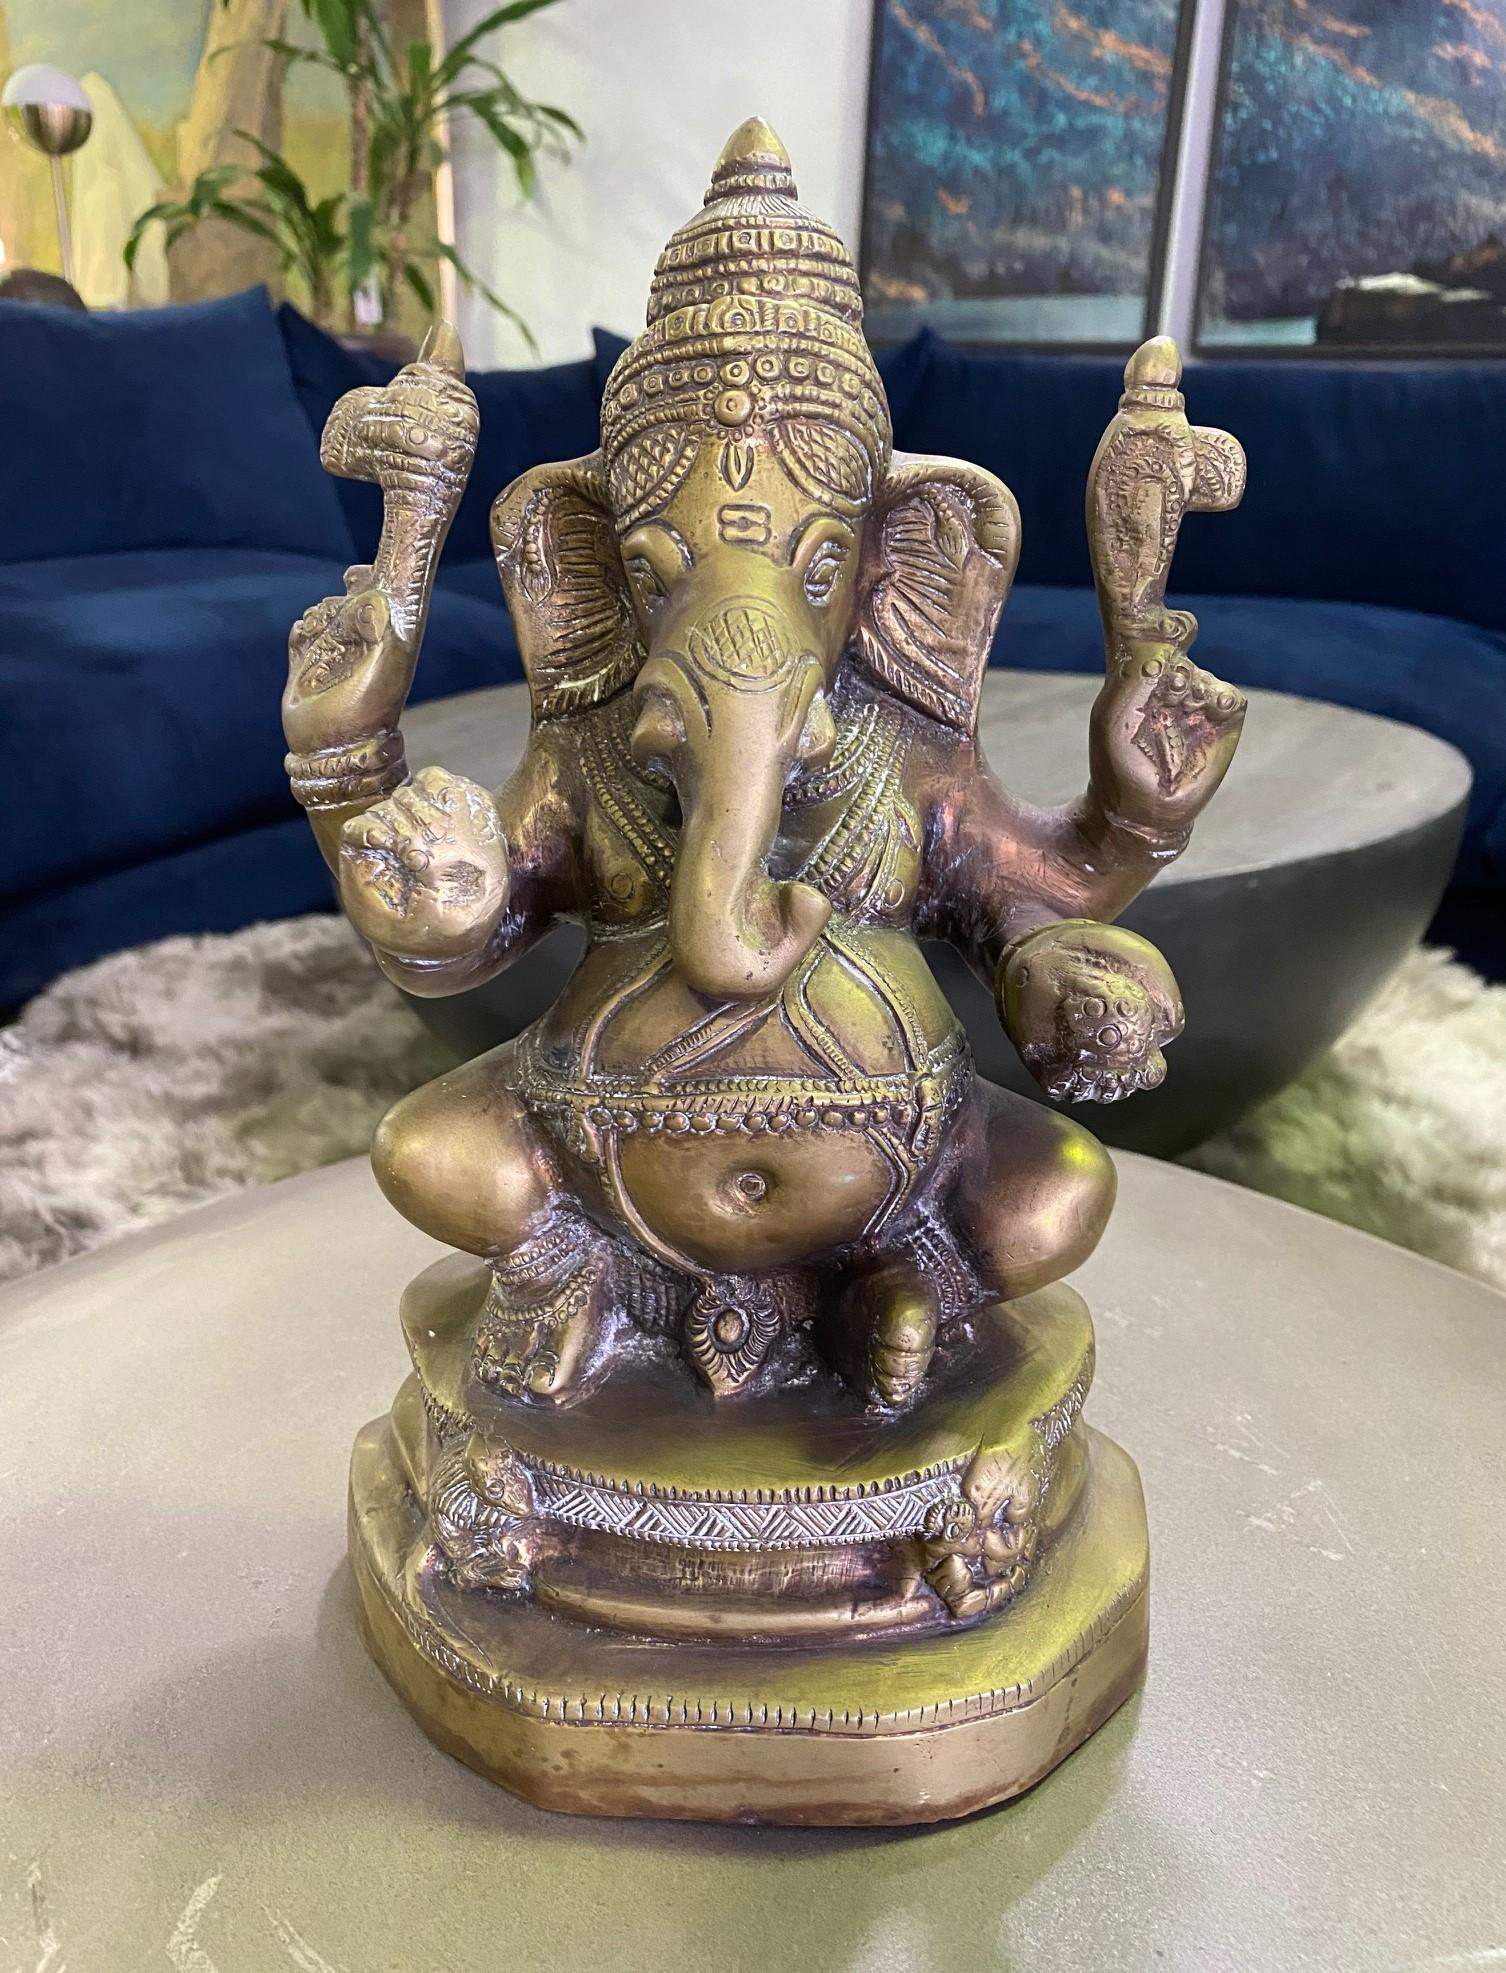 A wonderfully detailed brass sculpture of the Indian god Ganesh or Ganesha with his large easily recognizable elephant head. Ganesh is one of the best-known and most worshipped deities in the Hindu pantheon and is widely revered as the remover of